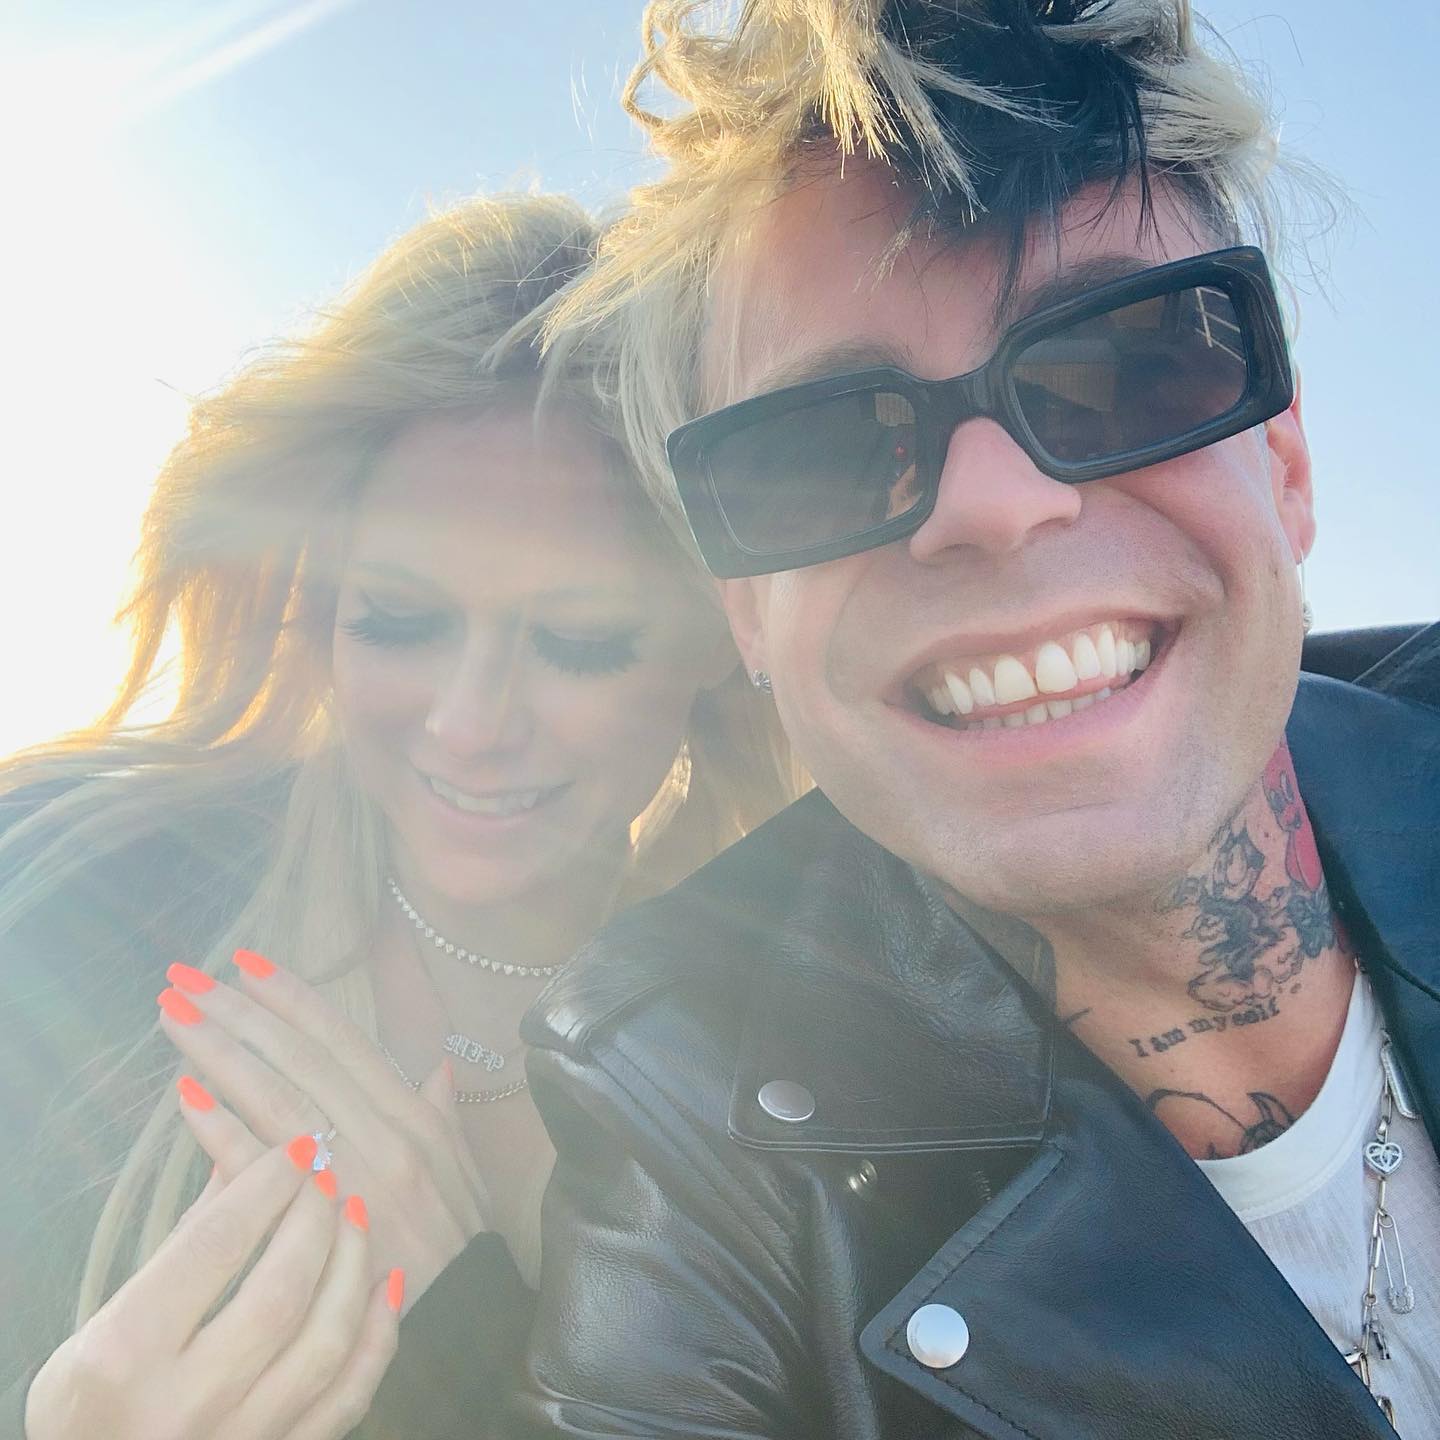 Who is Mod Sun? Know about his height, age, net worth, and dating history